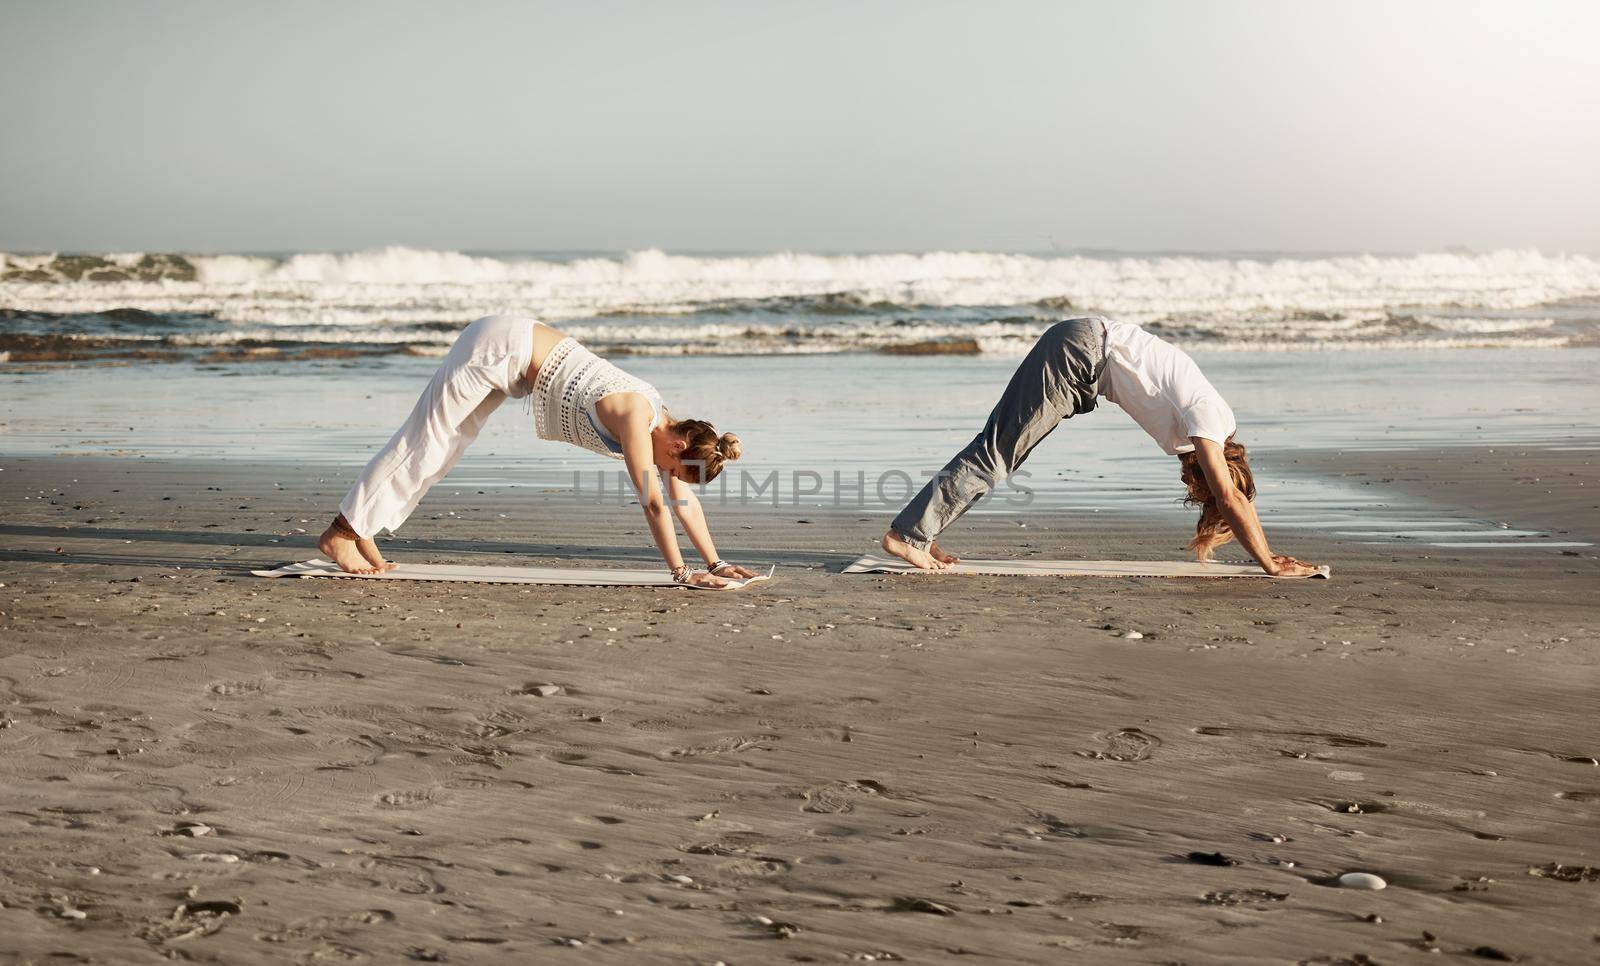 It is through yoga we gain strength and find peace. a young couple practising yoga together on the beach. by YuriArcurs